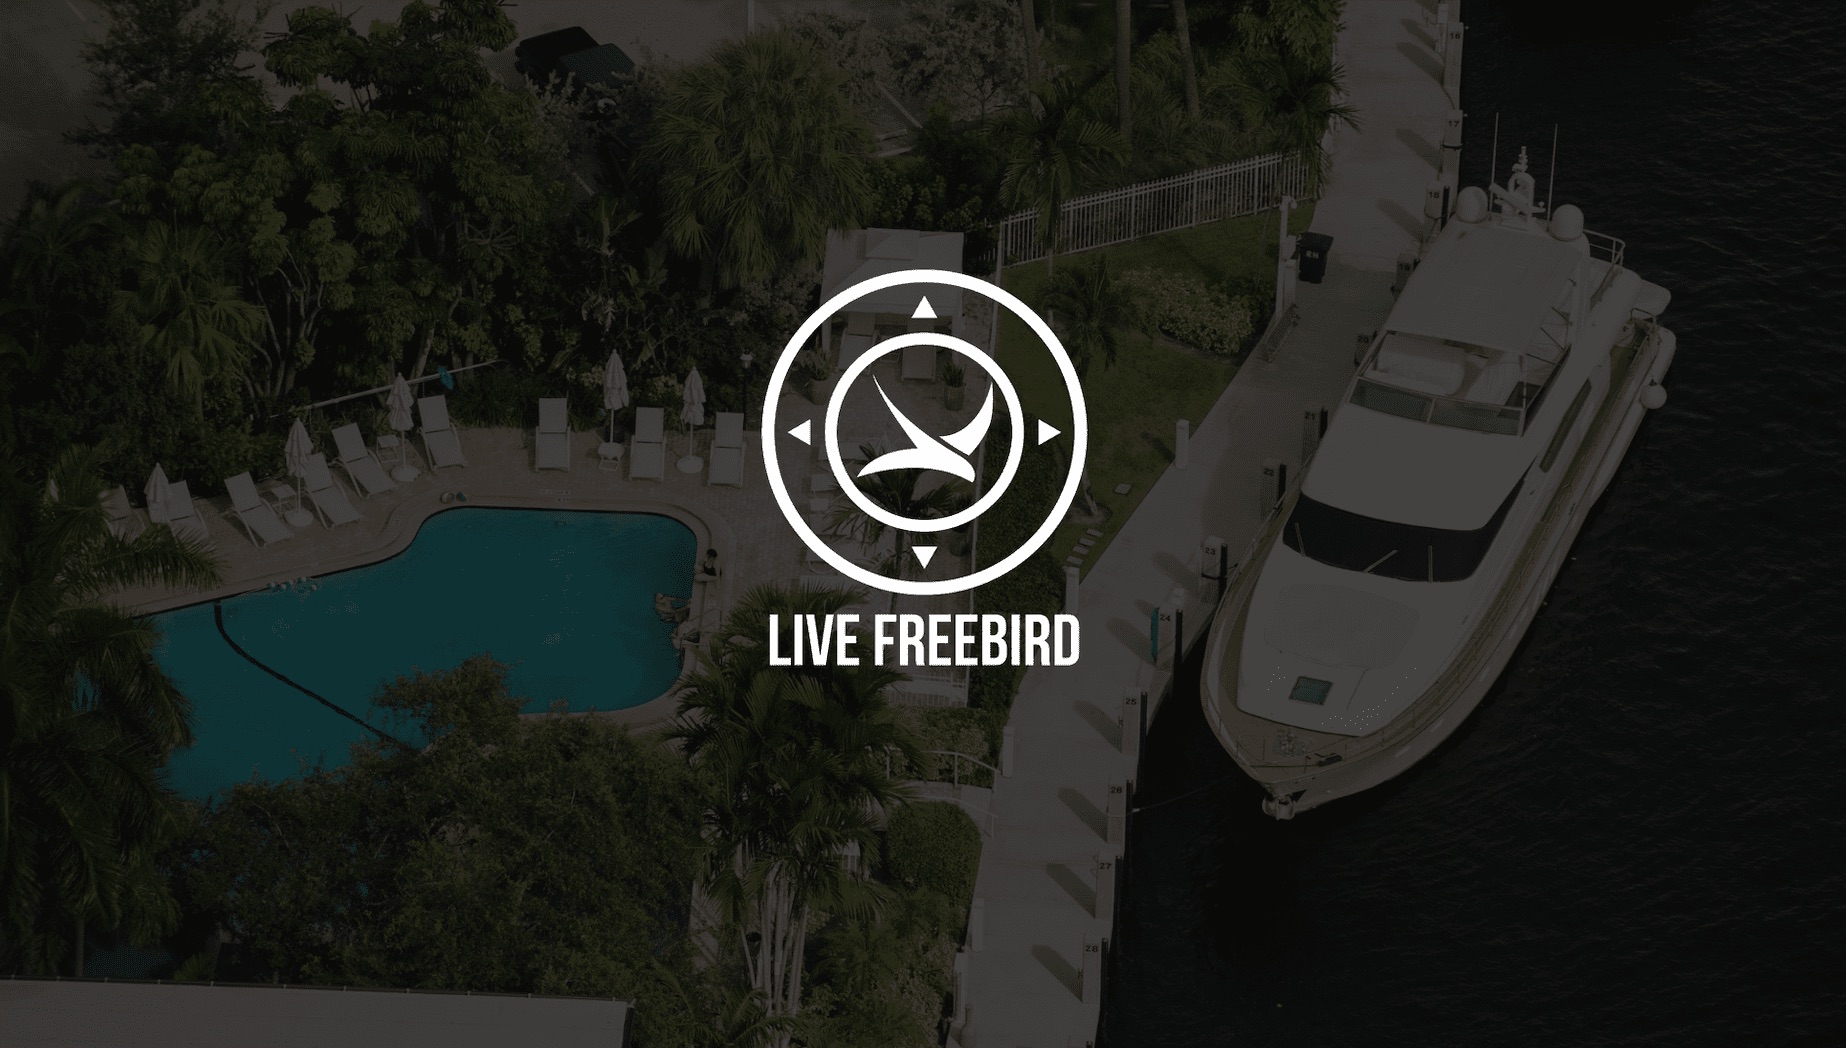 seo copywriting services White Live Freebird logo with dimmed background of a yacht by a dock and pool